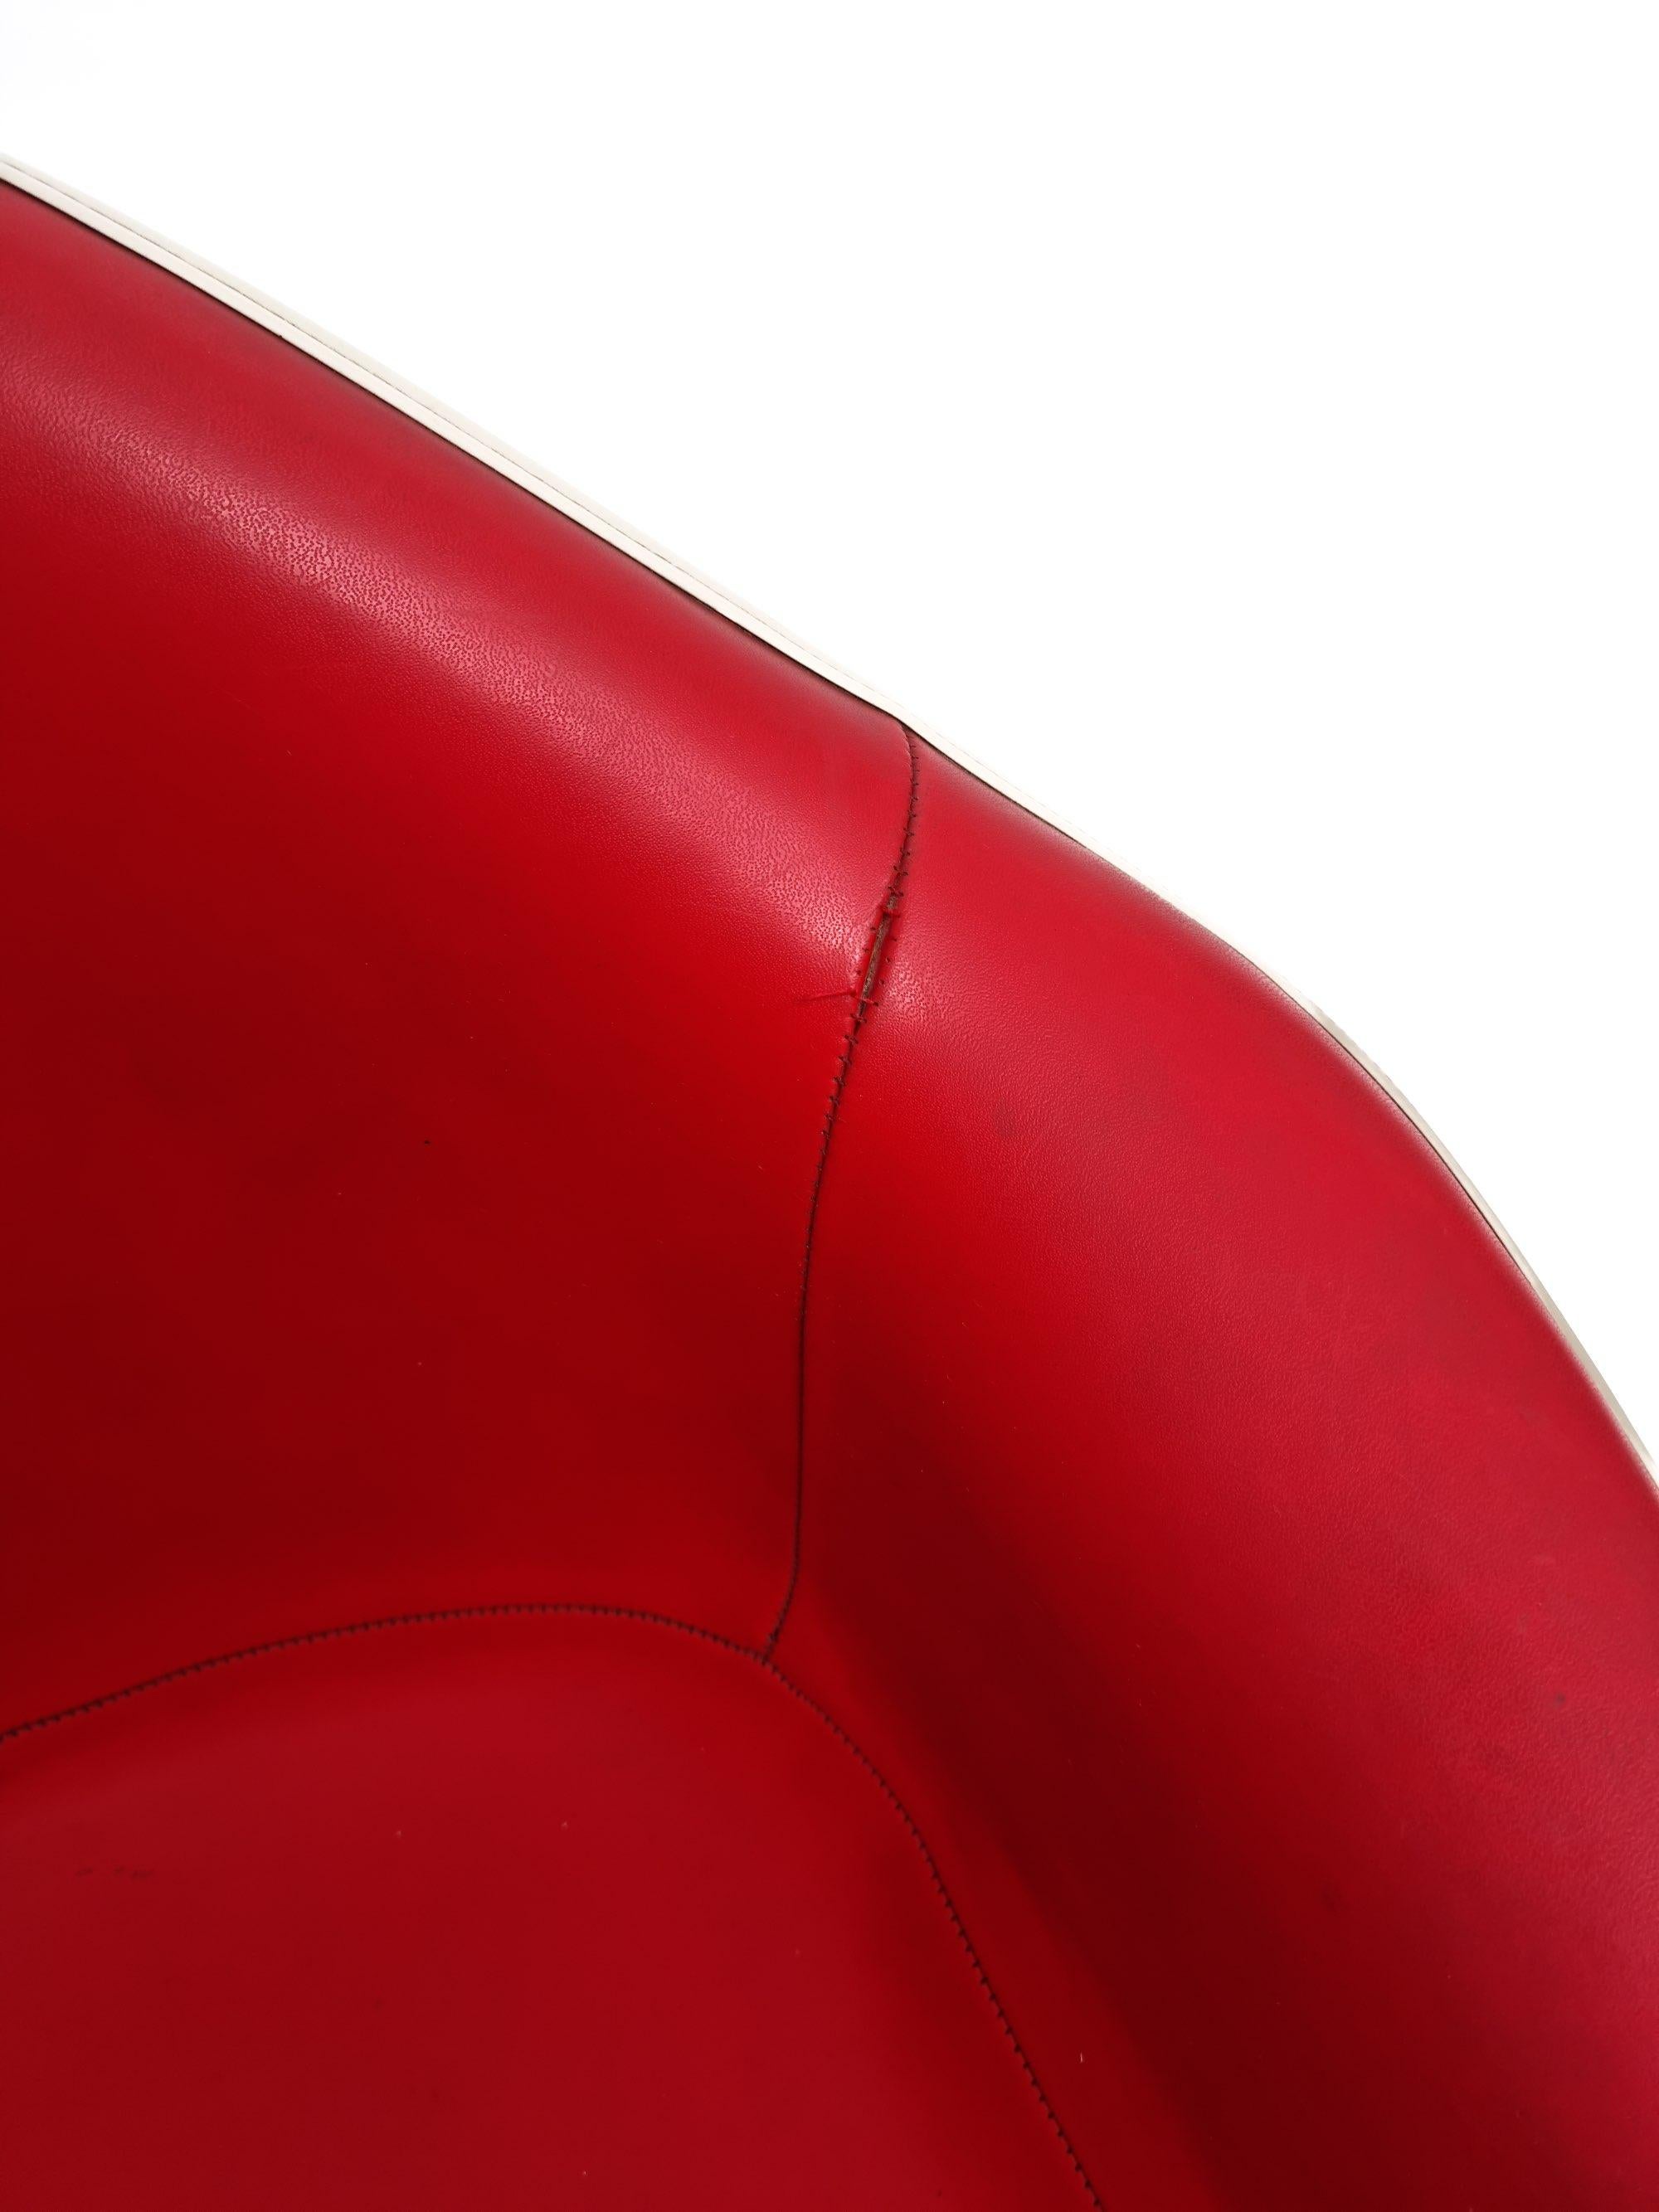 20th Century Red Leather 'Dax' Armchair by Charles & Ray Eames, 1960s For Sale